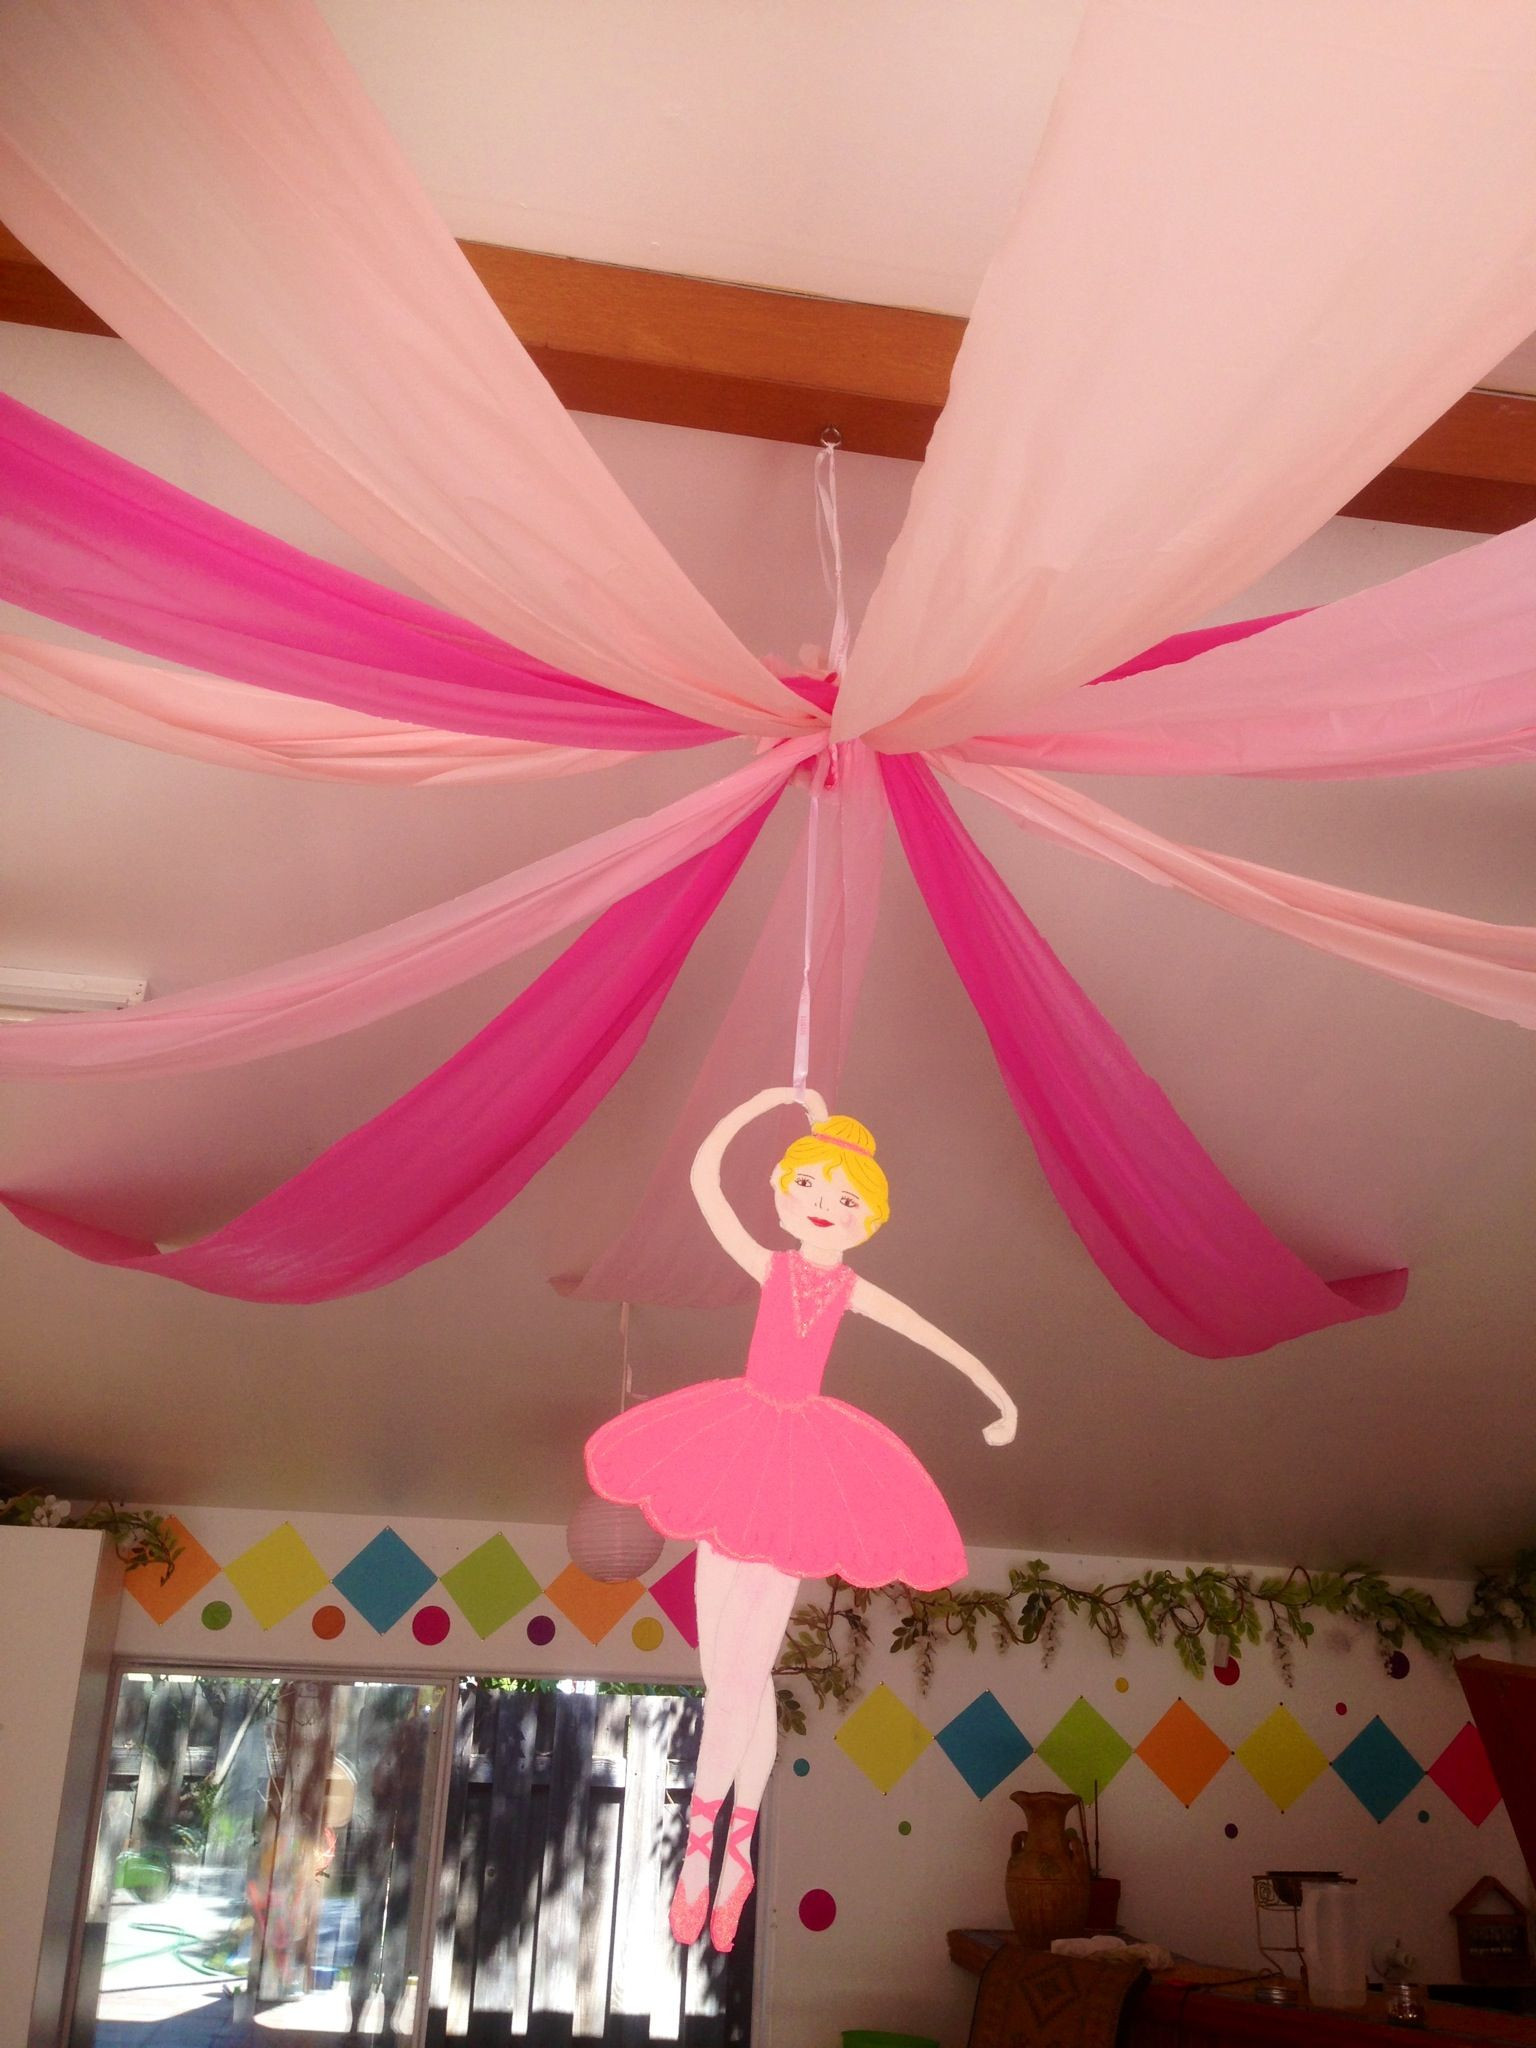 How To Decorate A Birthday Party
 Ceiling decorations for ballerina party